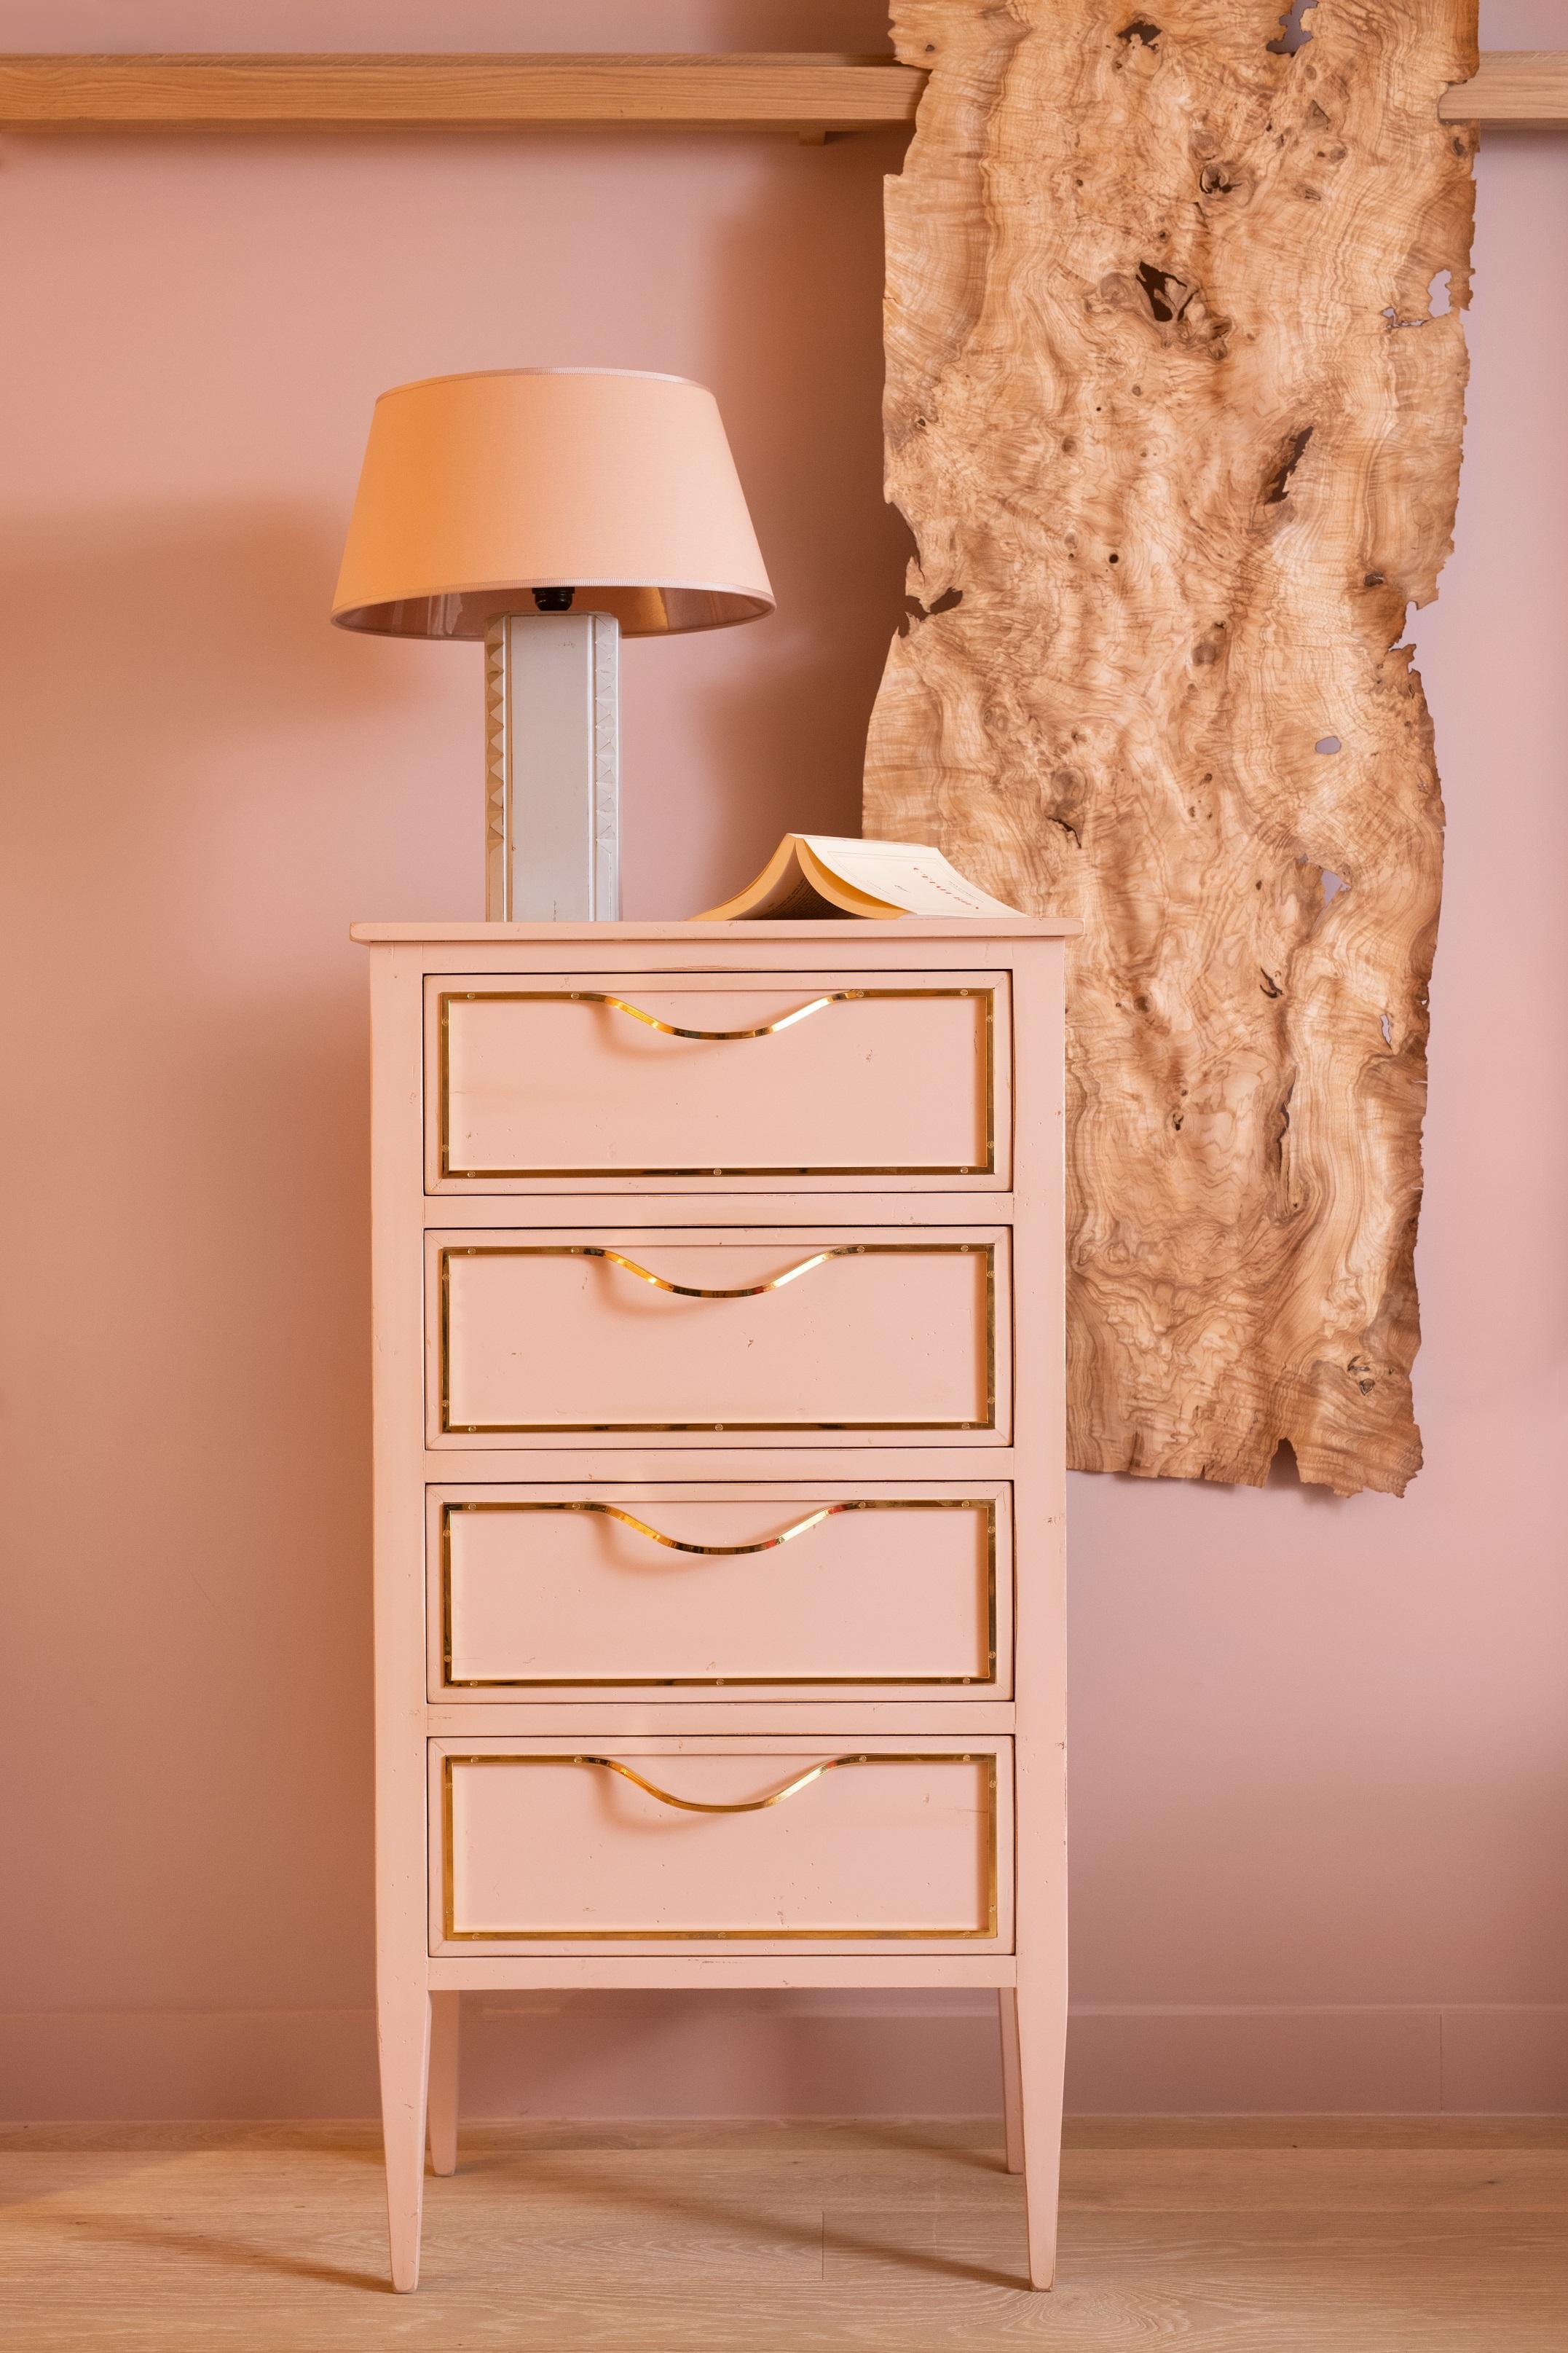 Grège lacquered beech lamp with square foot, cut sides highlighted with diamond points.
It is a piece of furniture made by hand by the craftsmen of Moissonnier, French cabinetmaker since 1885. Our craftsmen use ancestral know-how and have developed